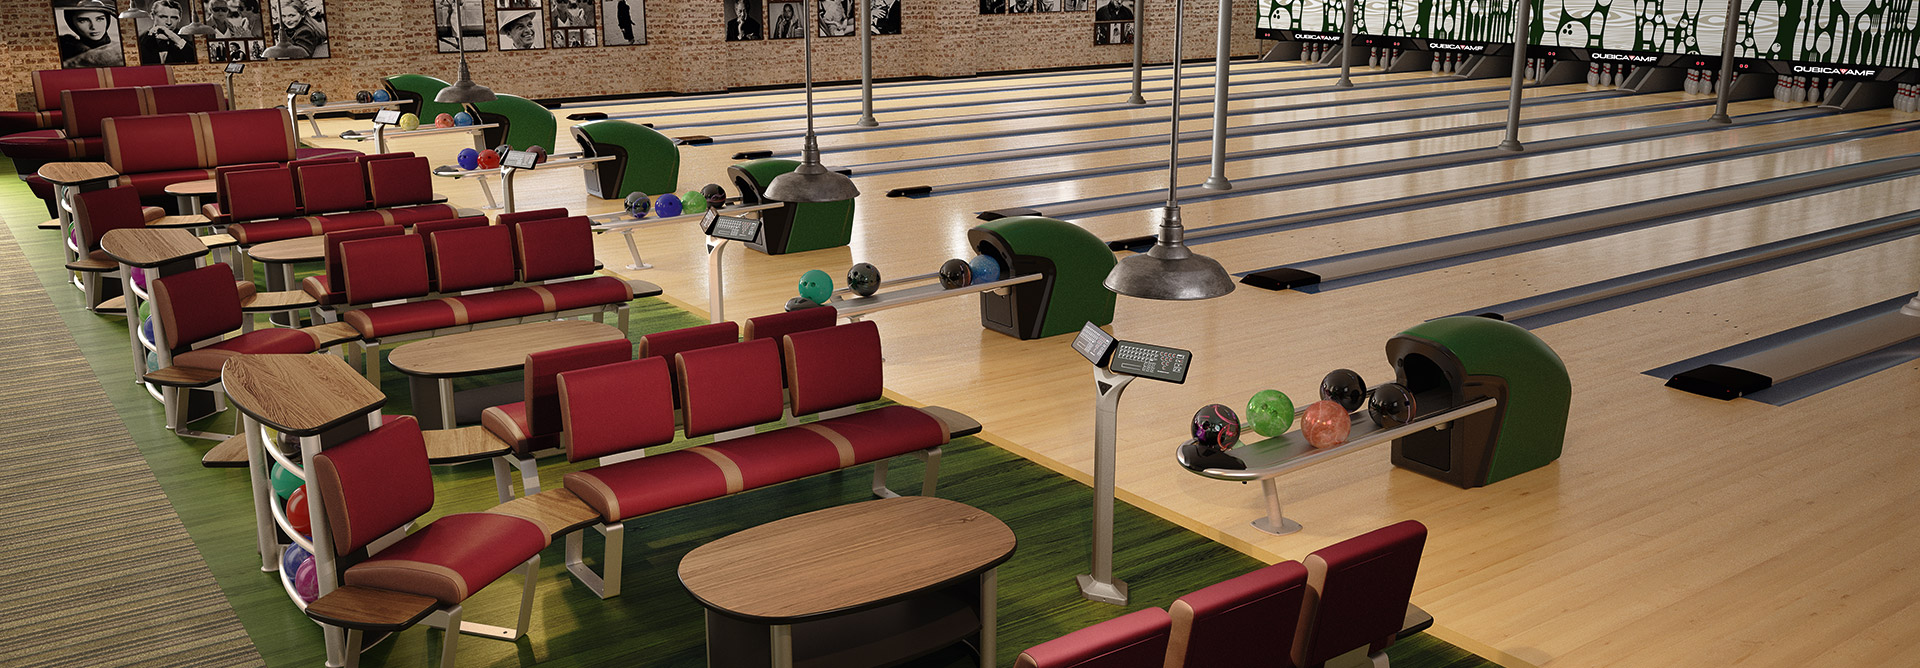 Bowling-QubicaAMF-furniture-harmony-synergy-banner.jpg